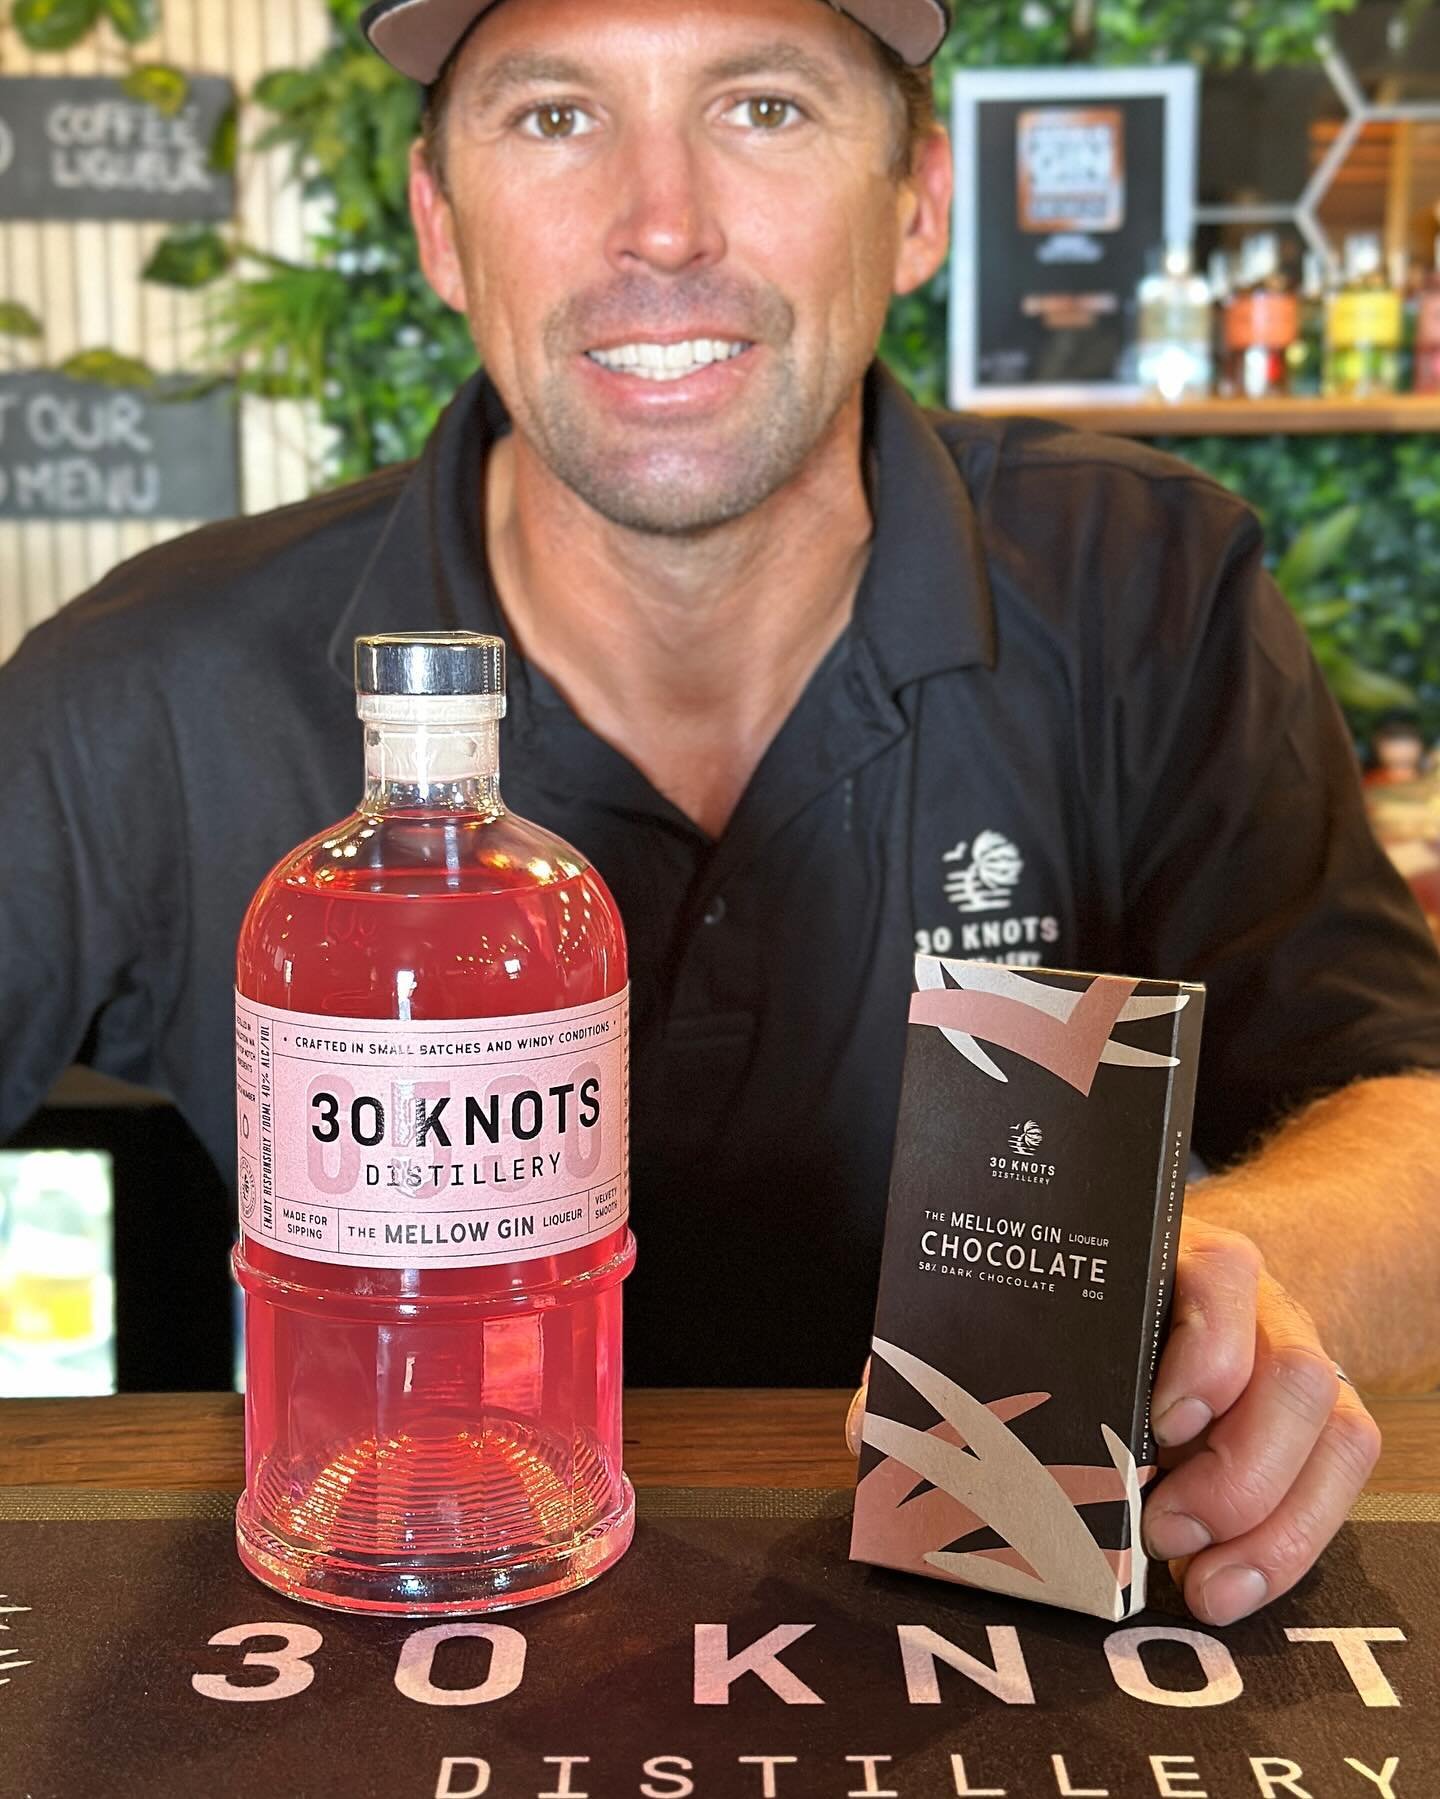 For those who know our founder and head distiller Muz, it&rsquo;s no secret that he has an insatiable sweet tooth. So, it was only a matter of time before we combined his love for chocolate with our handcrafted locally made spirits.

Introducing our 